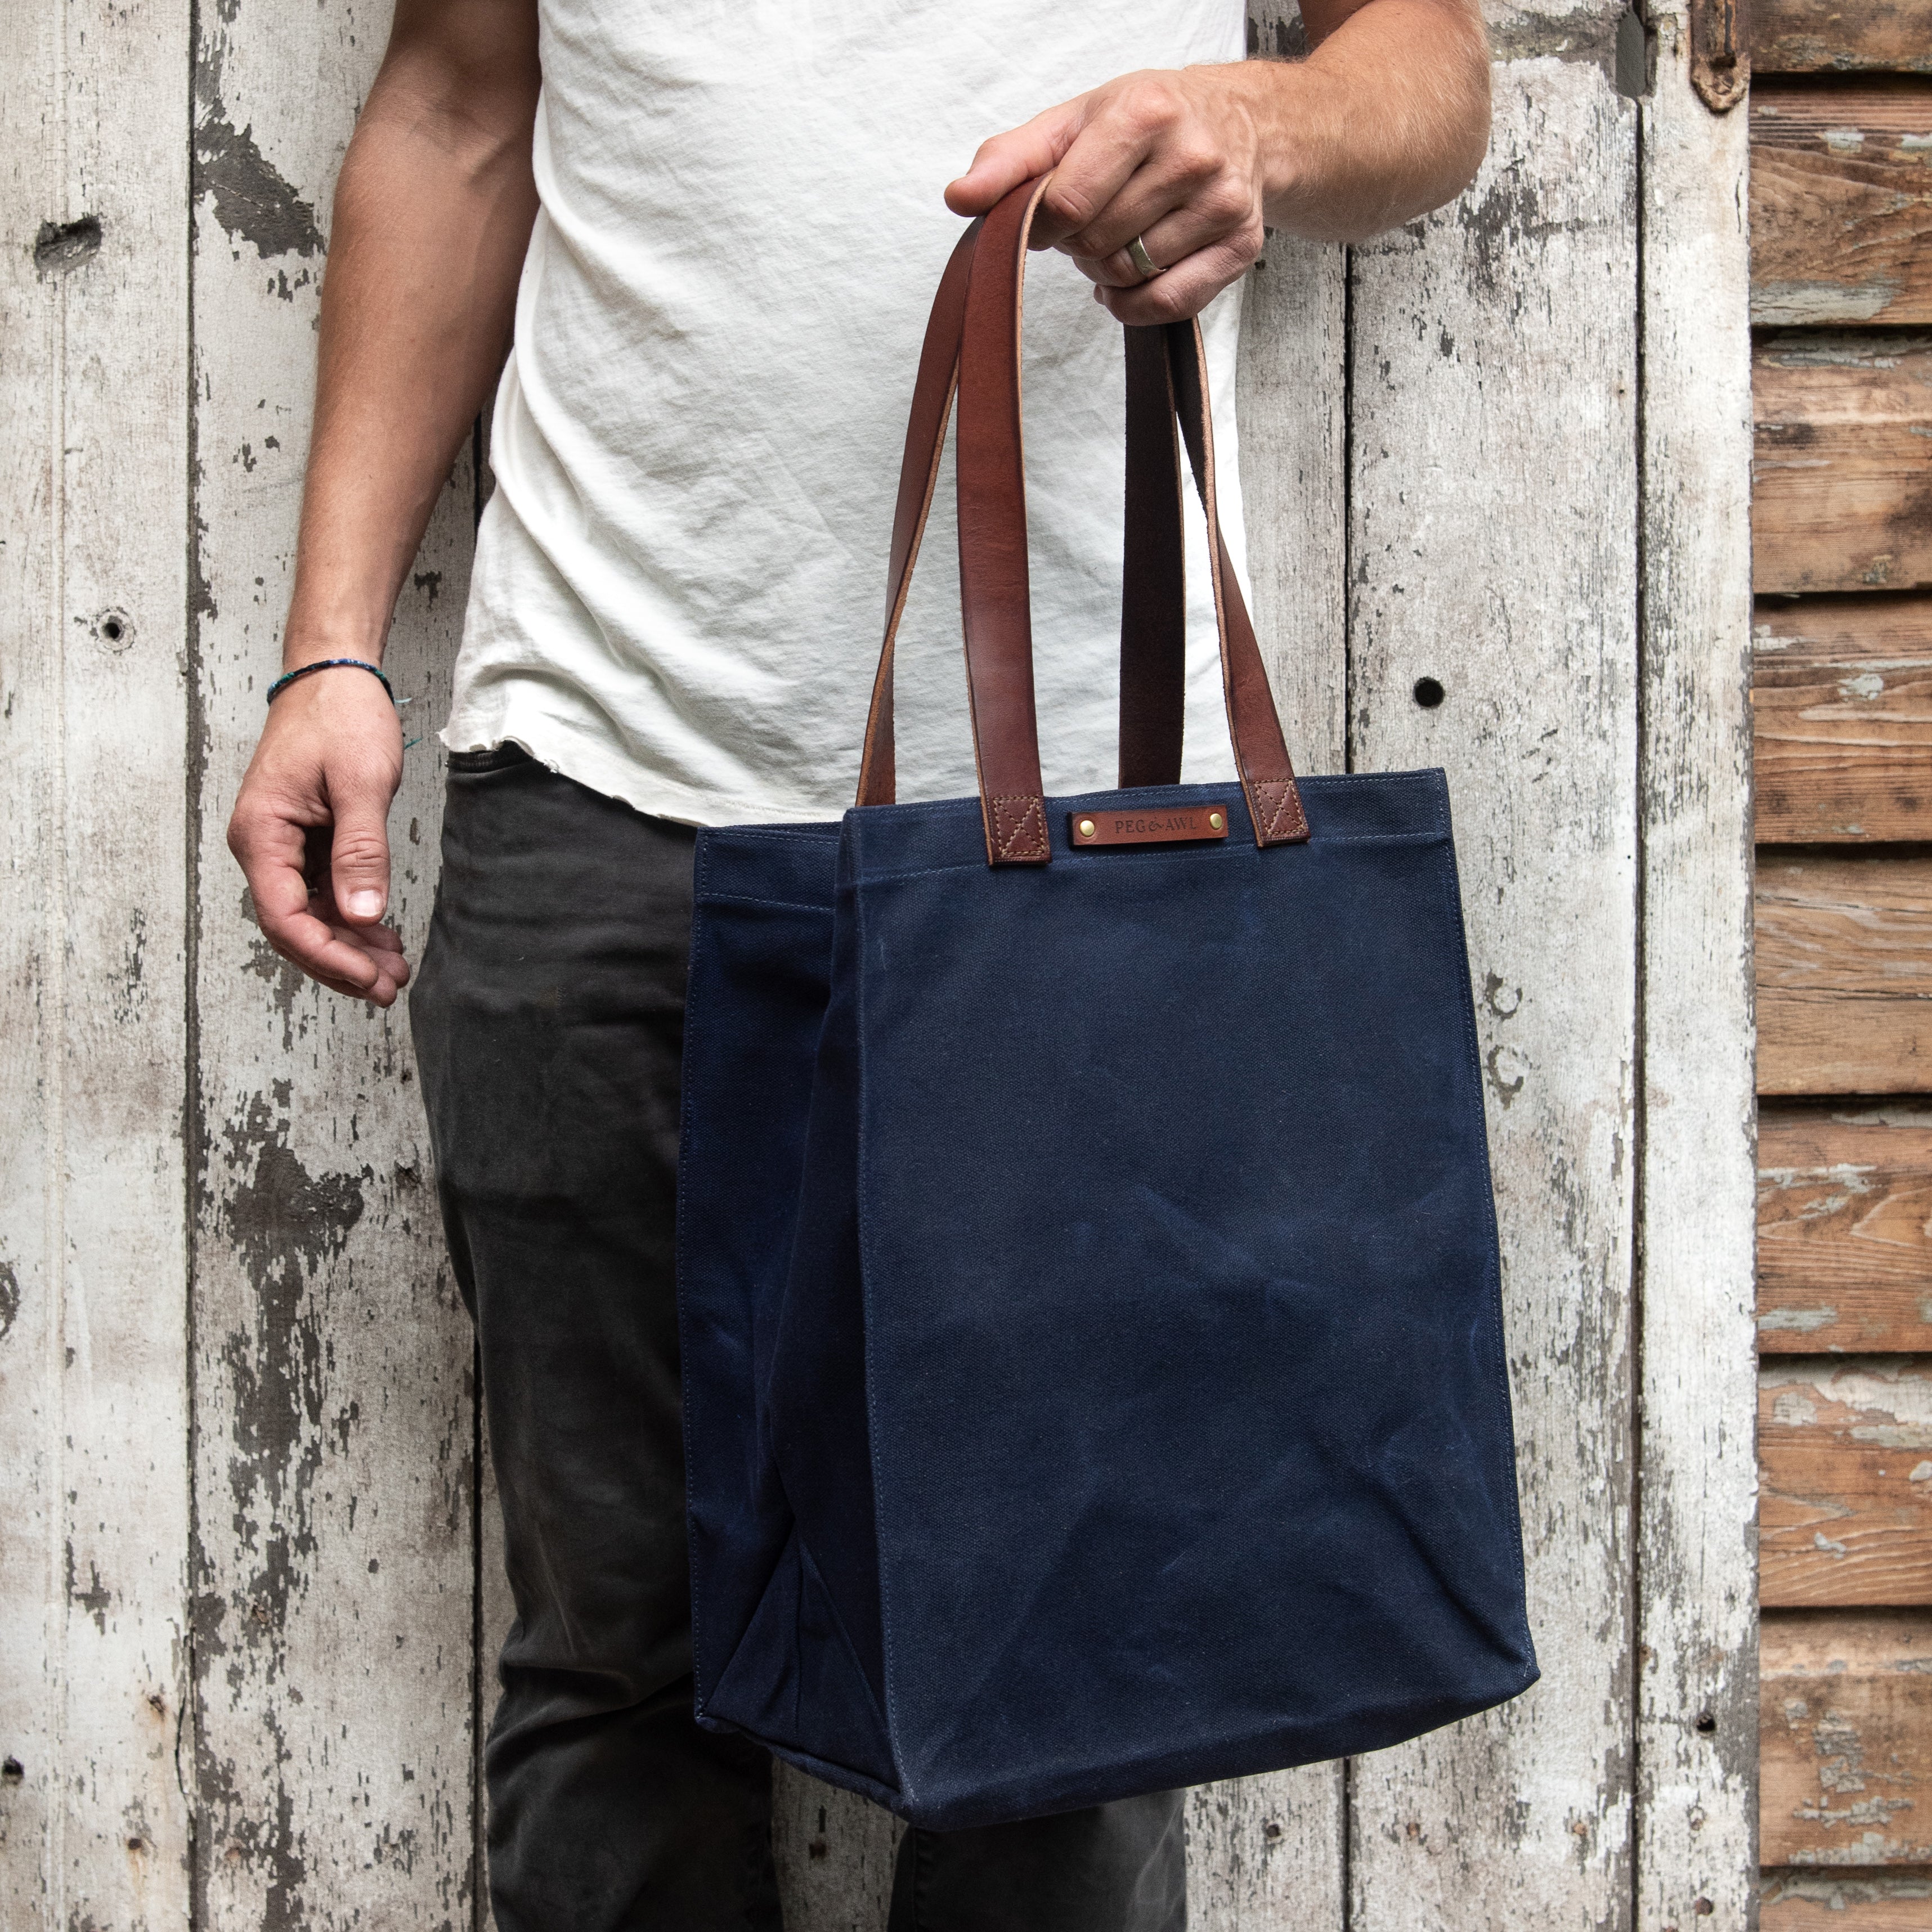 The Marlowe Carryall | Waxed Canvas Shopping Tote Bag – Peg and Awl